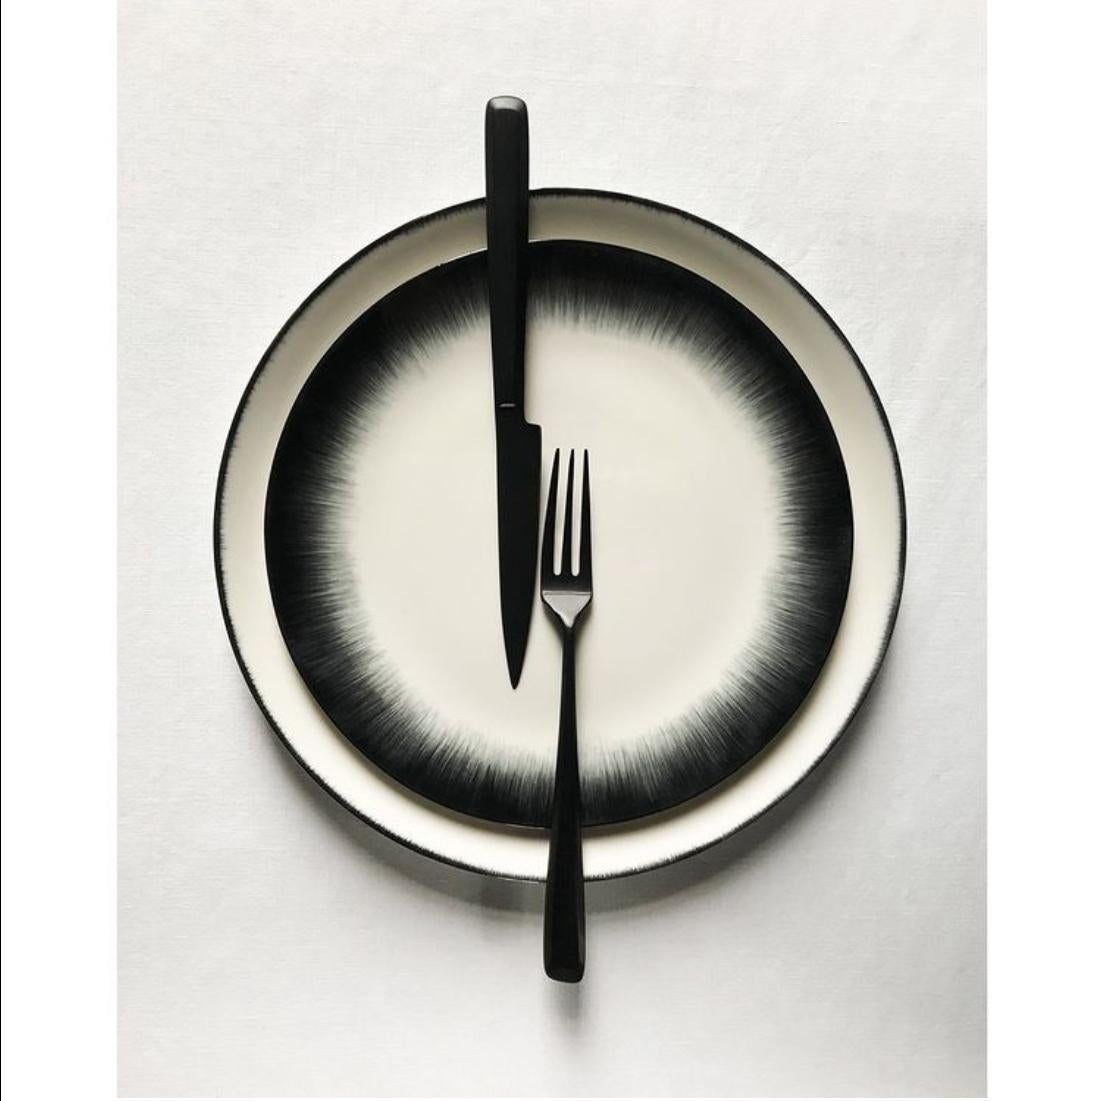 Ann Demeulemeester for Serax 13 cm High Plates (set of two) In New Condition For Sale In Laguna Beach, CA